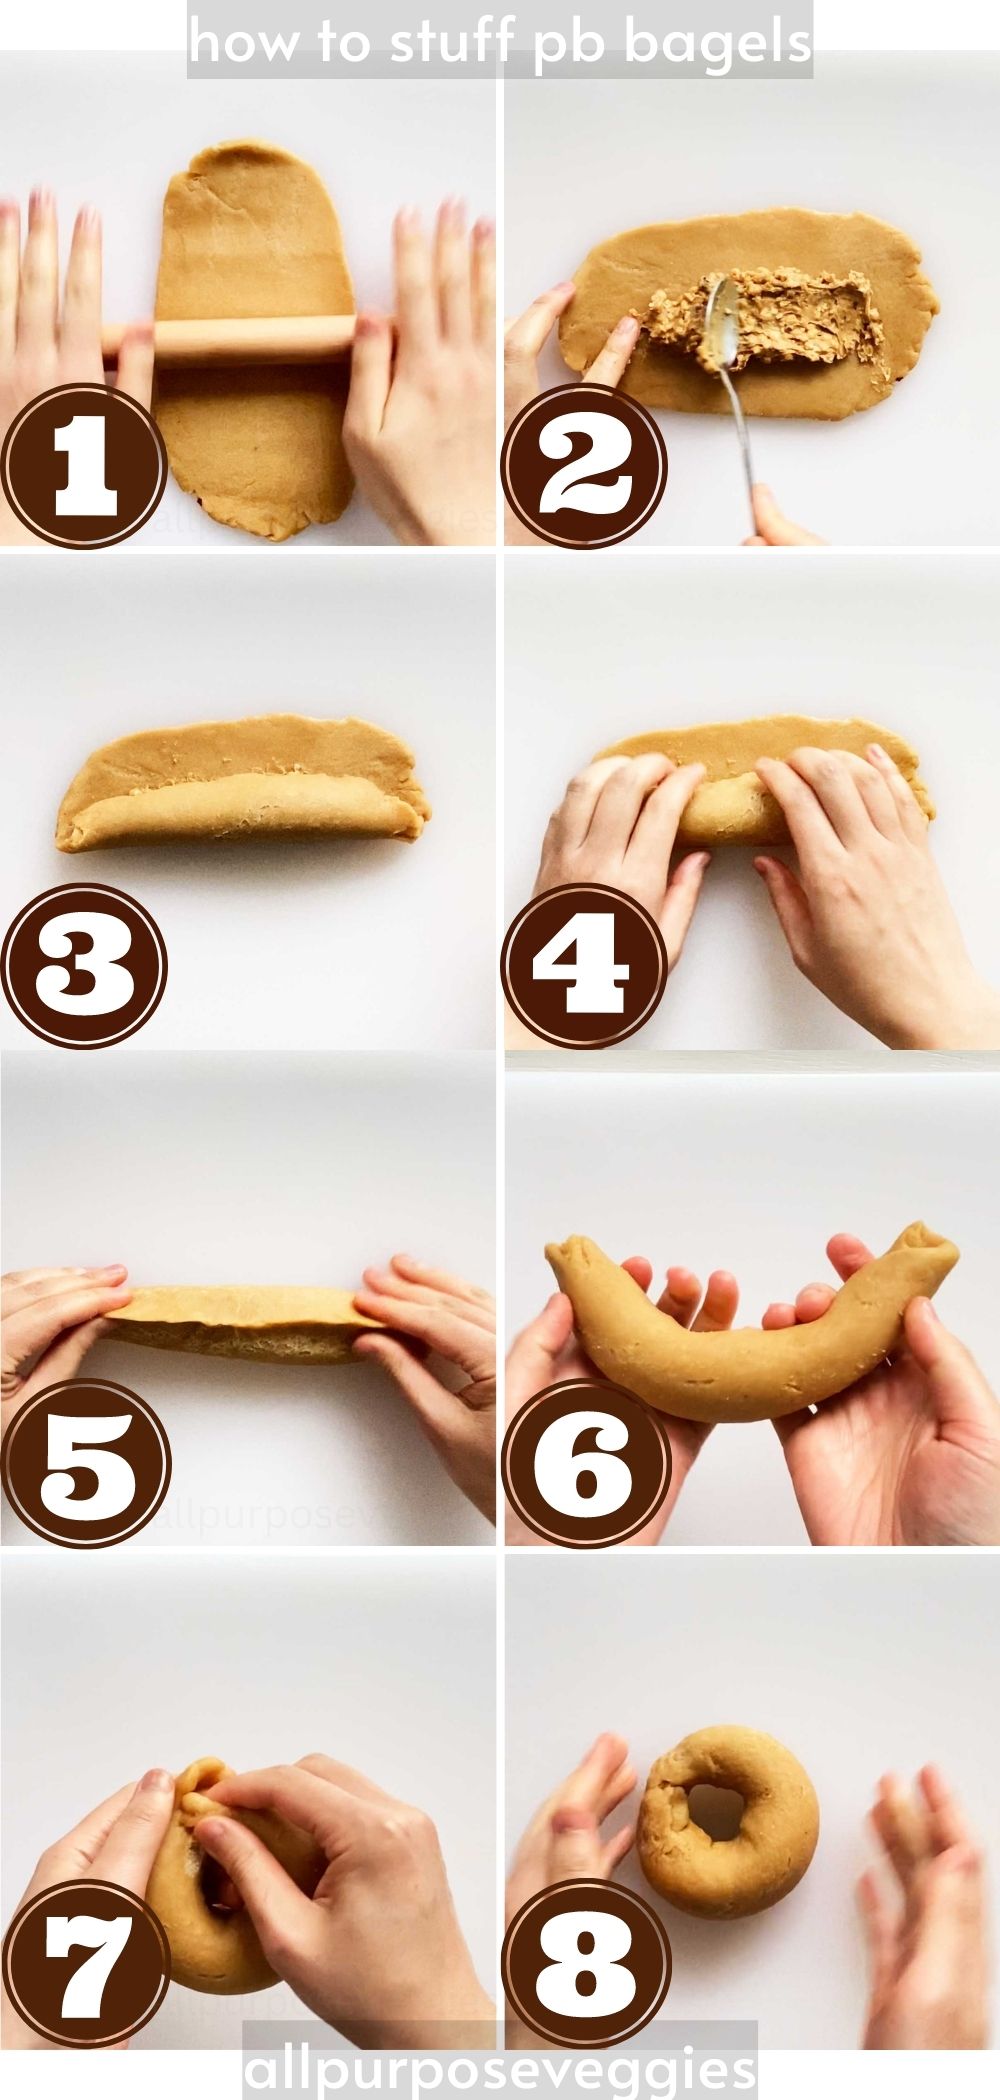 step by step guide - how to stuff pb bagels with peanut butter filling